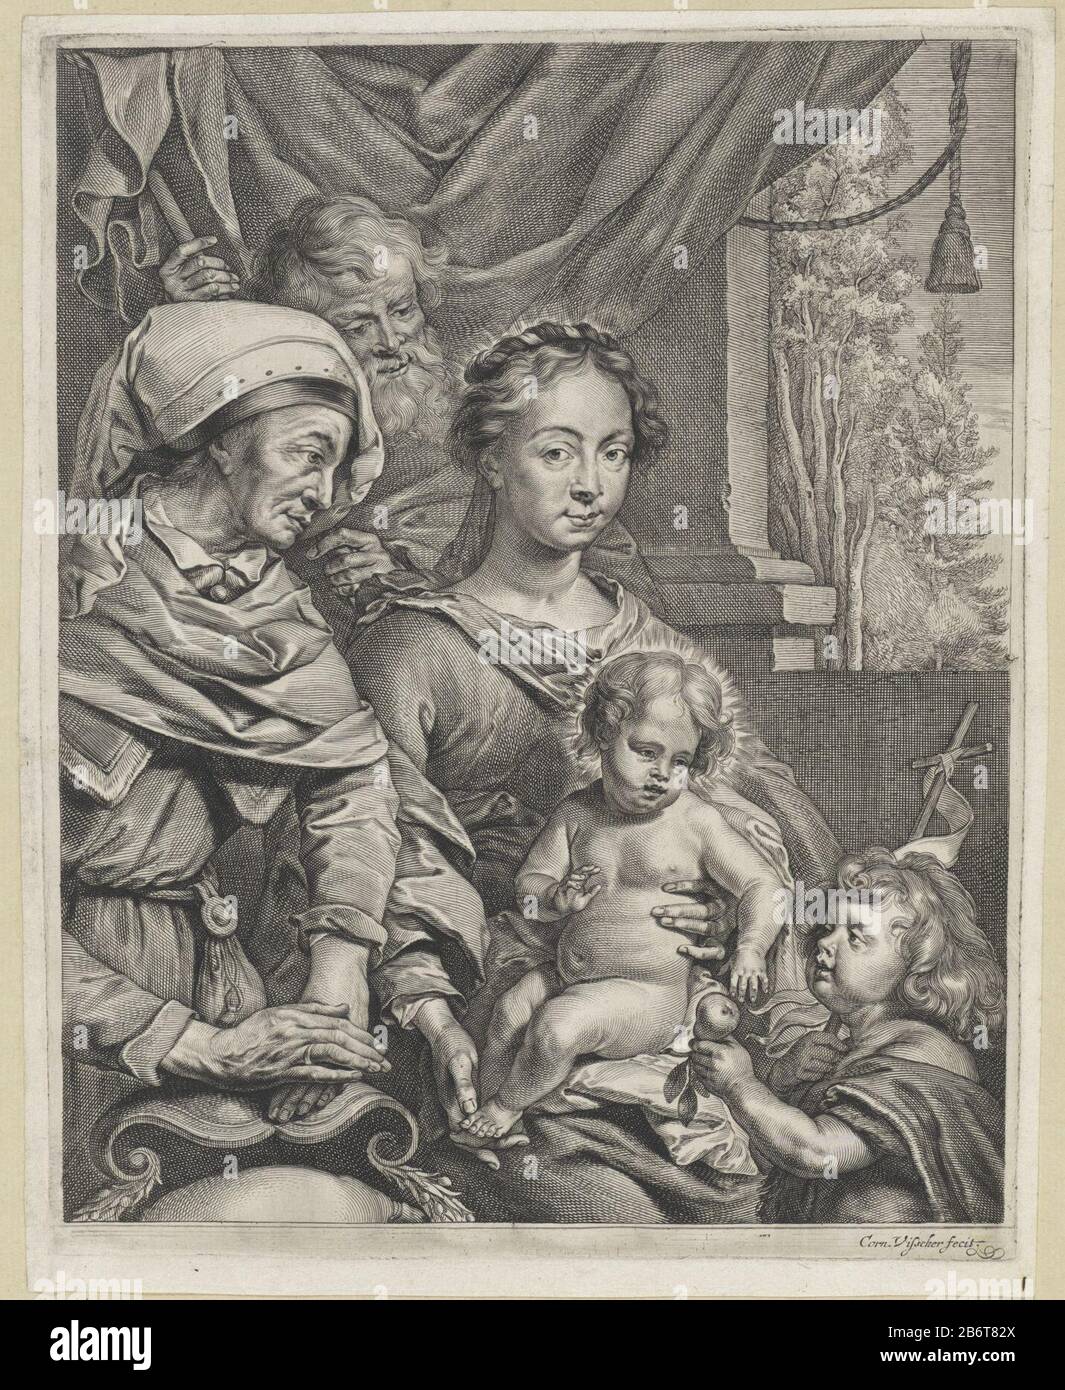 Heilige Familie met Elisabet en Johannes the holy family with Elizabeth and John the Baptist as a child. John, ha in his hand a standard, represents the BC Child and hands him a peer aan. Manufacturer : print maker: Cornelis Visscher (II) (referred to on object) to a design of: Jacopo Palma (il Vecchio) (possibly) Place manufacture: Haarlem Dating: 1638 - 1658 Physical features: engra and etching material: paper Technique: engra (printing process) / etch dimensions: plate edge: h 236 mm × W 300 mm Subject: Holy Family with John the Baptist (as child) fruits: pear Stock Photo